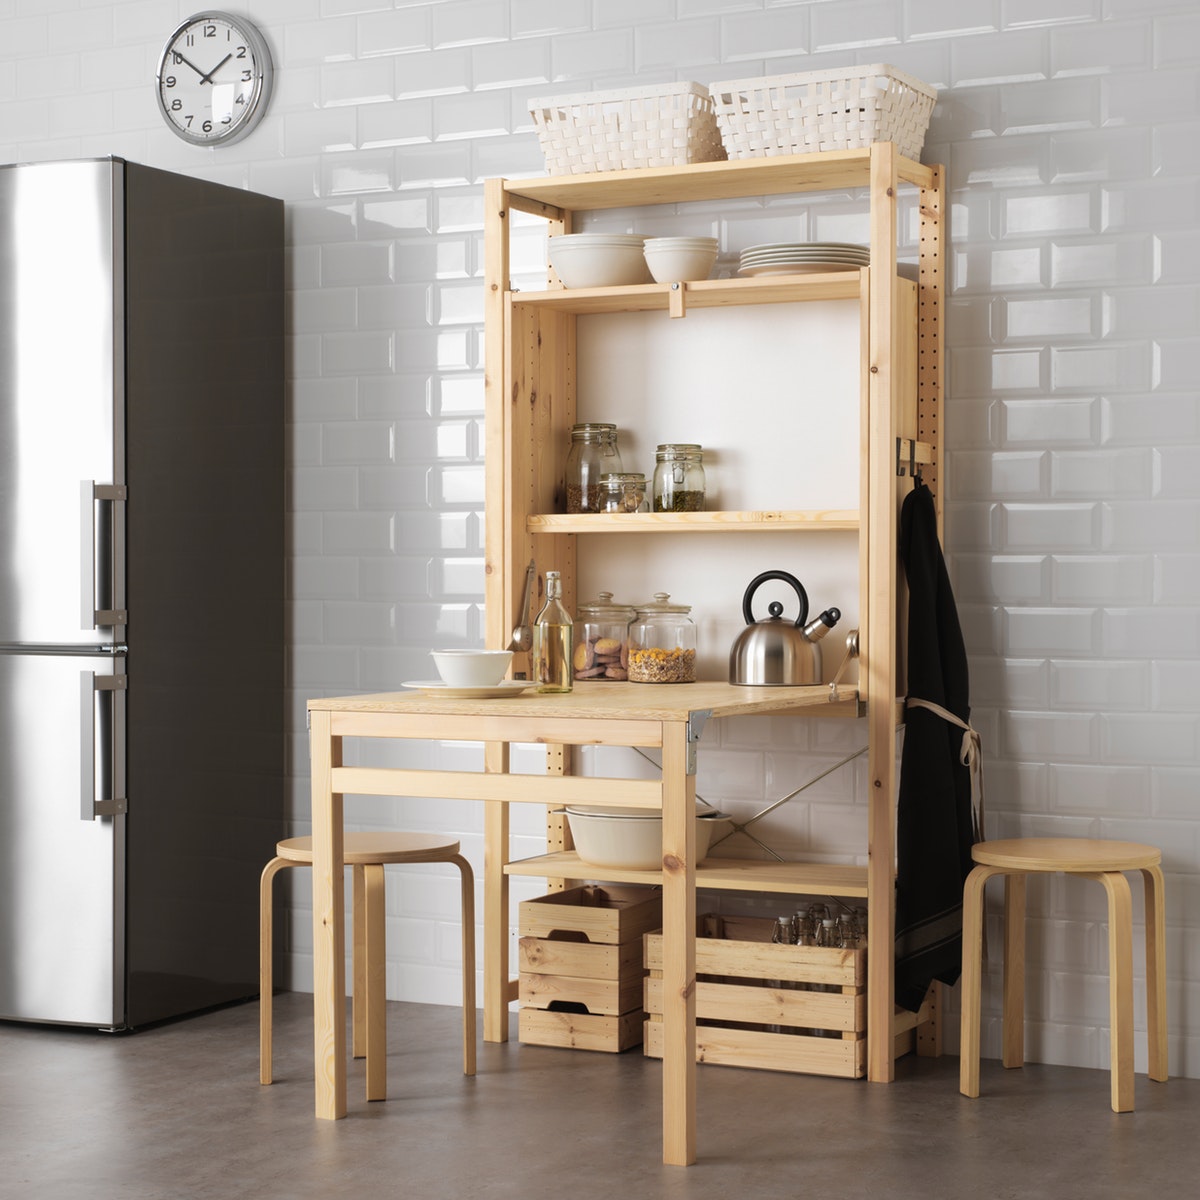 Simple Kitchen with Multifunctional Furniture